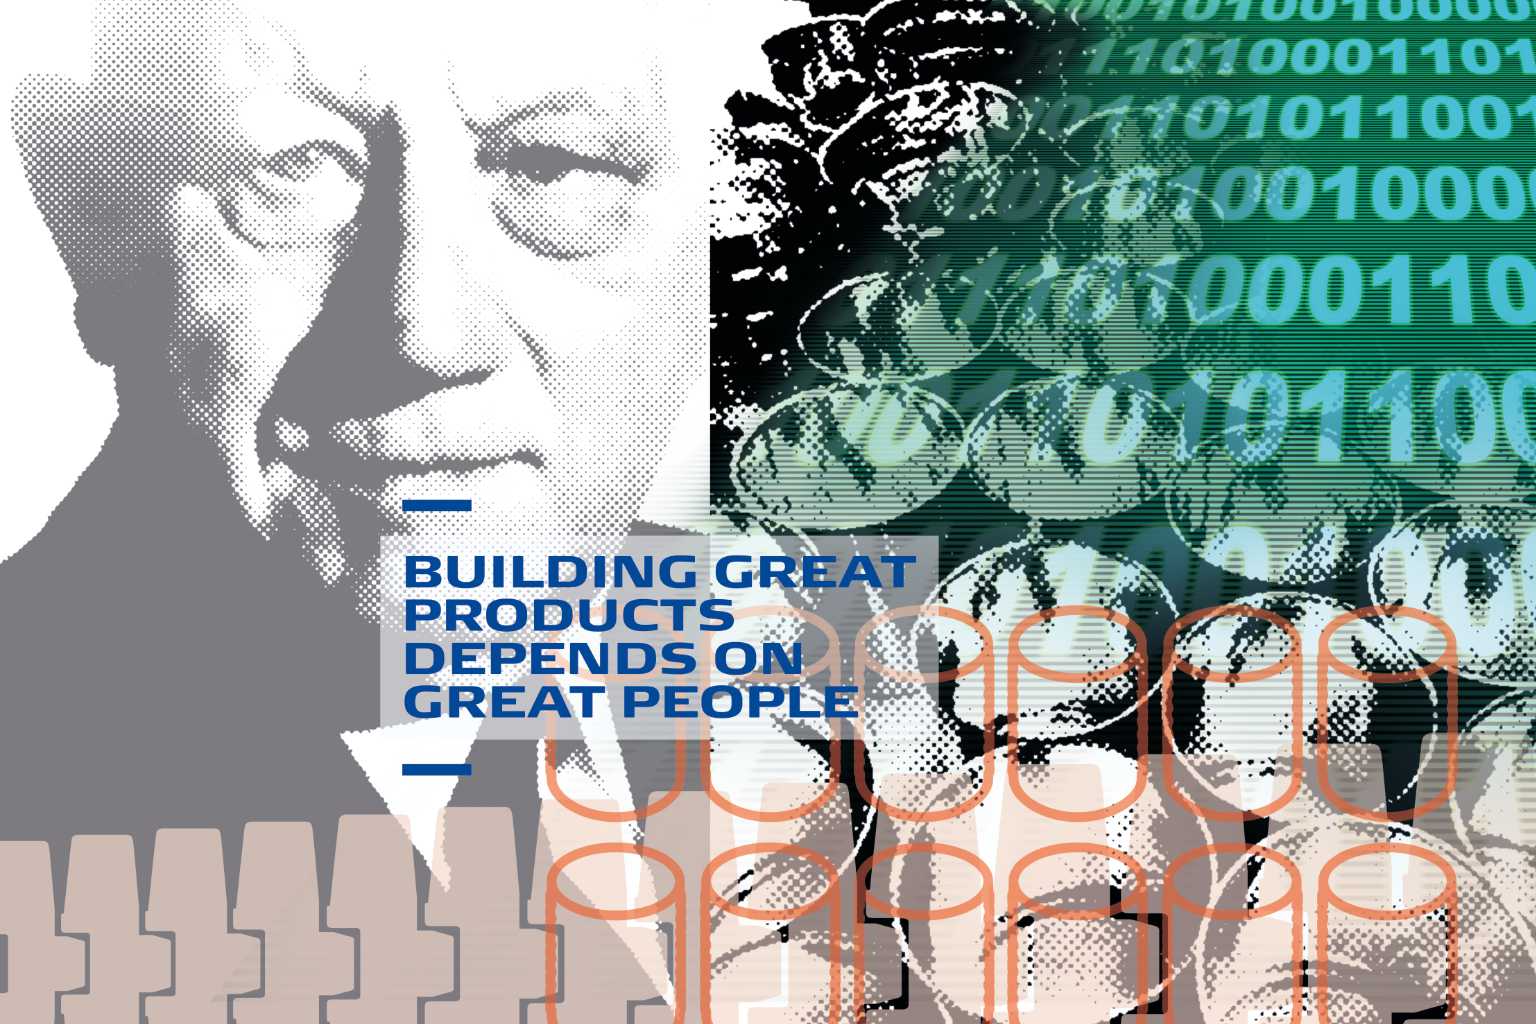 Building great products depends on great people